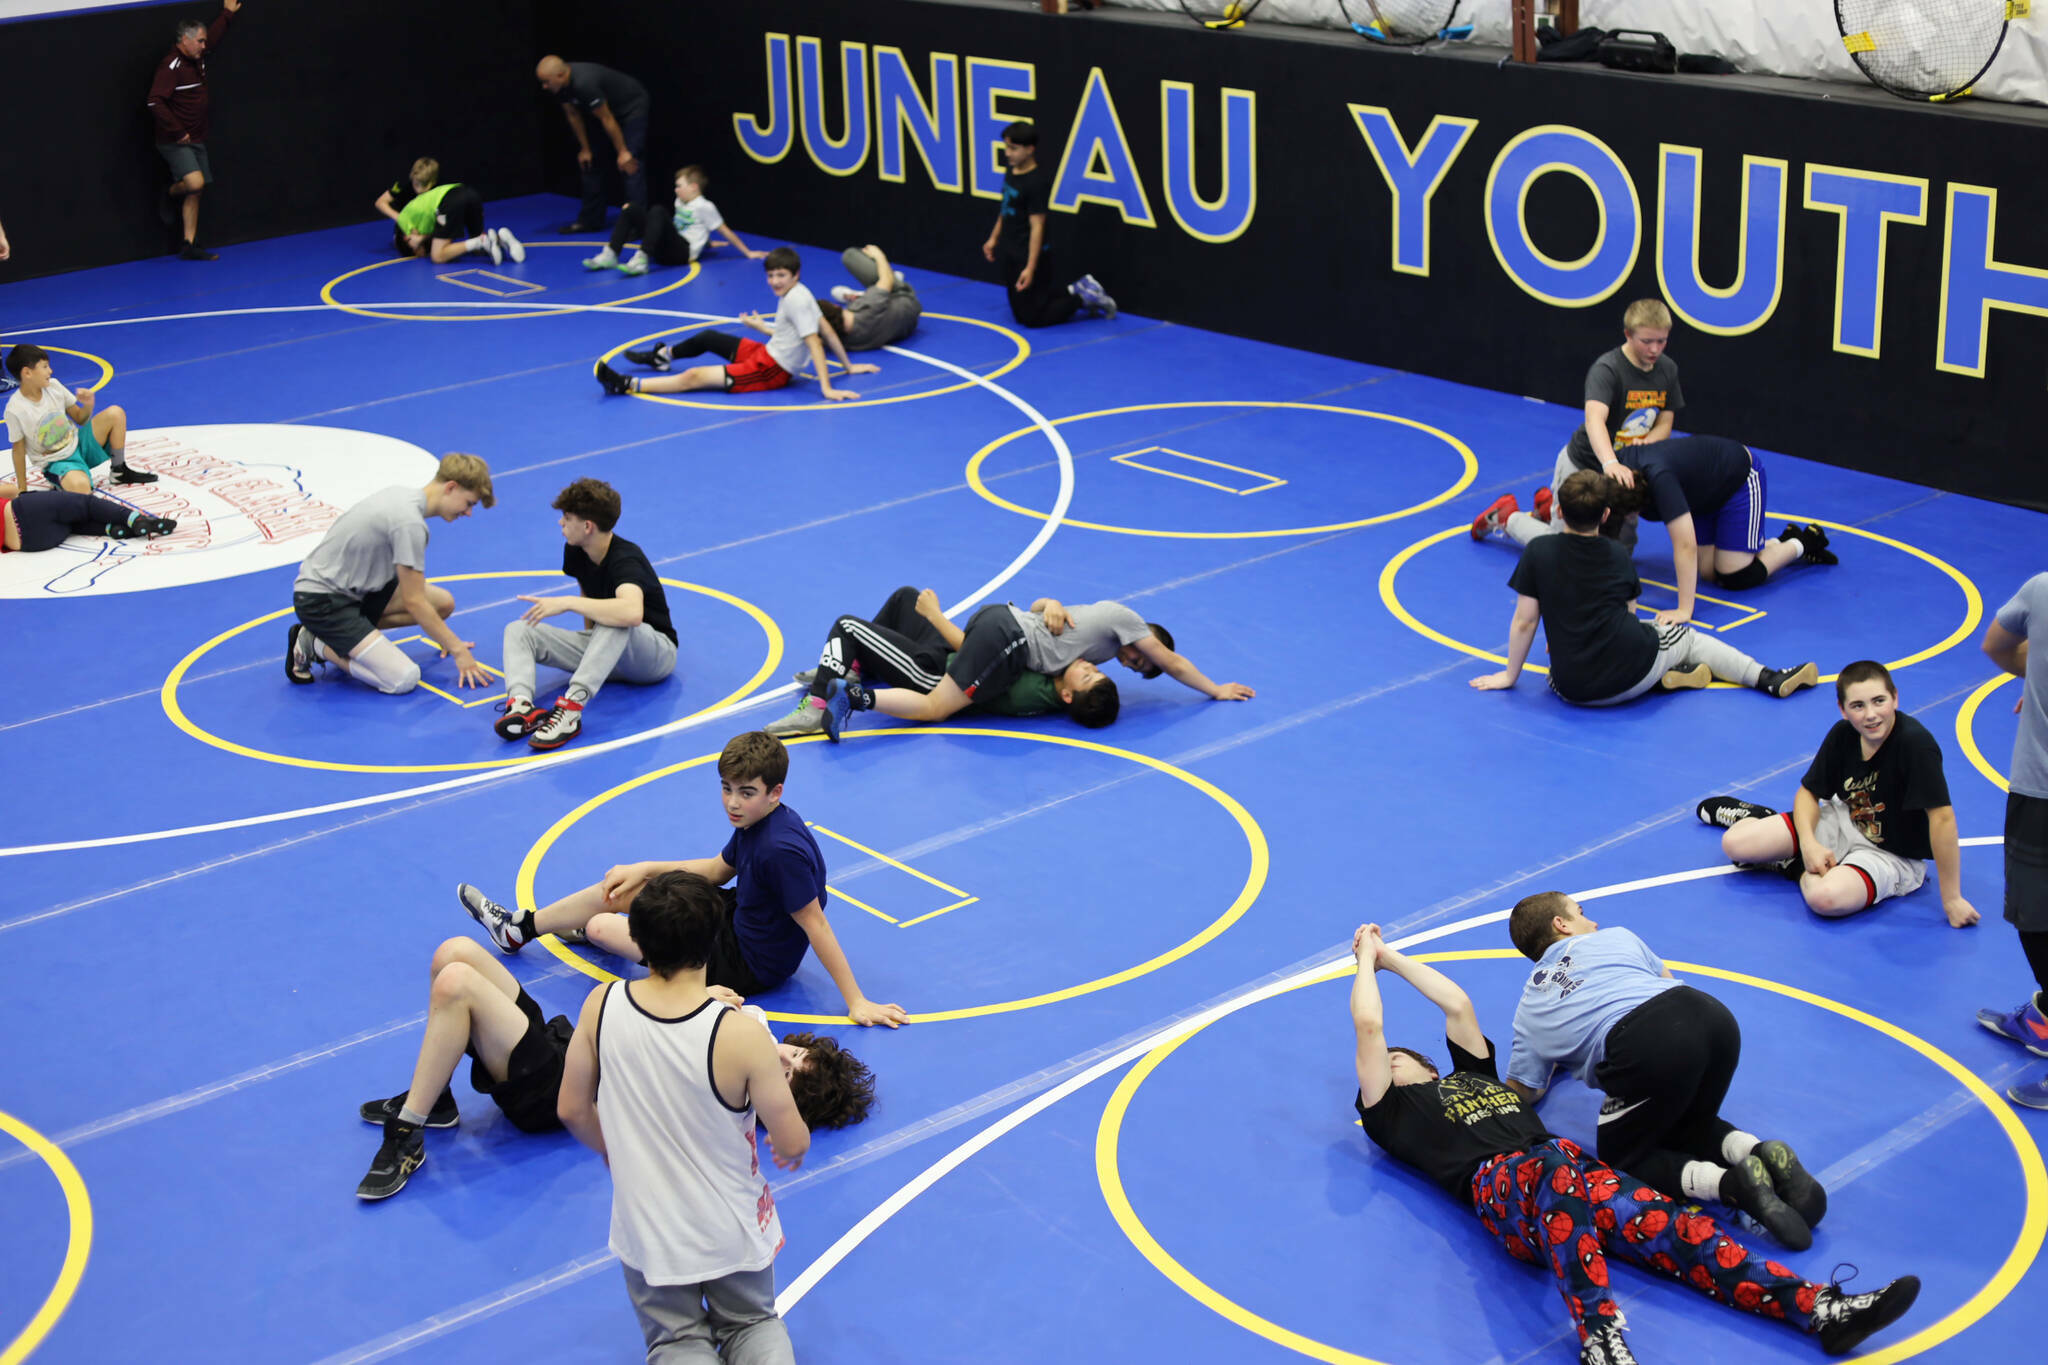 Athletes practice new moves while wrestling during a 2023 Labor Day weekend clinic at the Juneau Youth Wrestling Club. (Clarise Larson / Juneau Empire file photo)